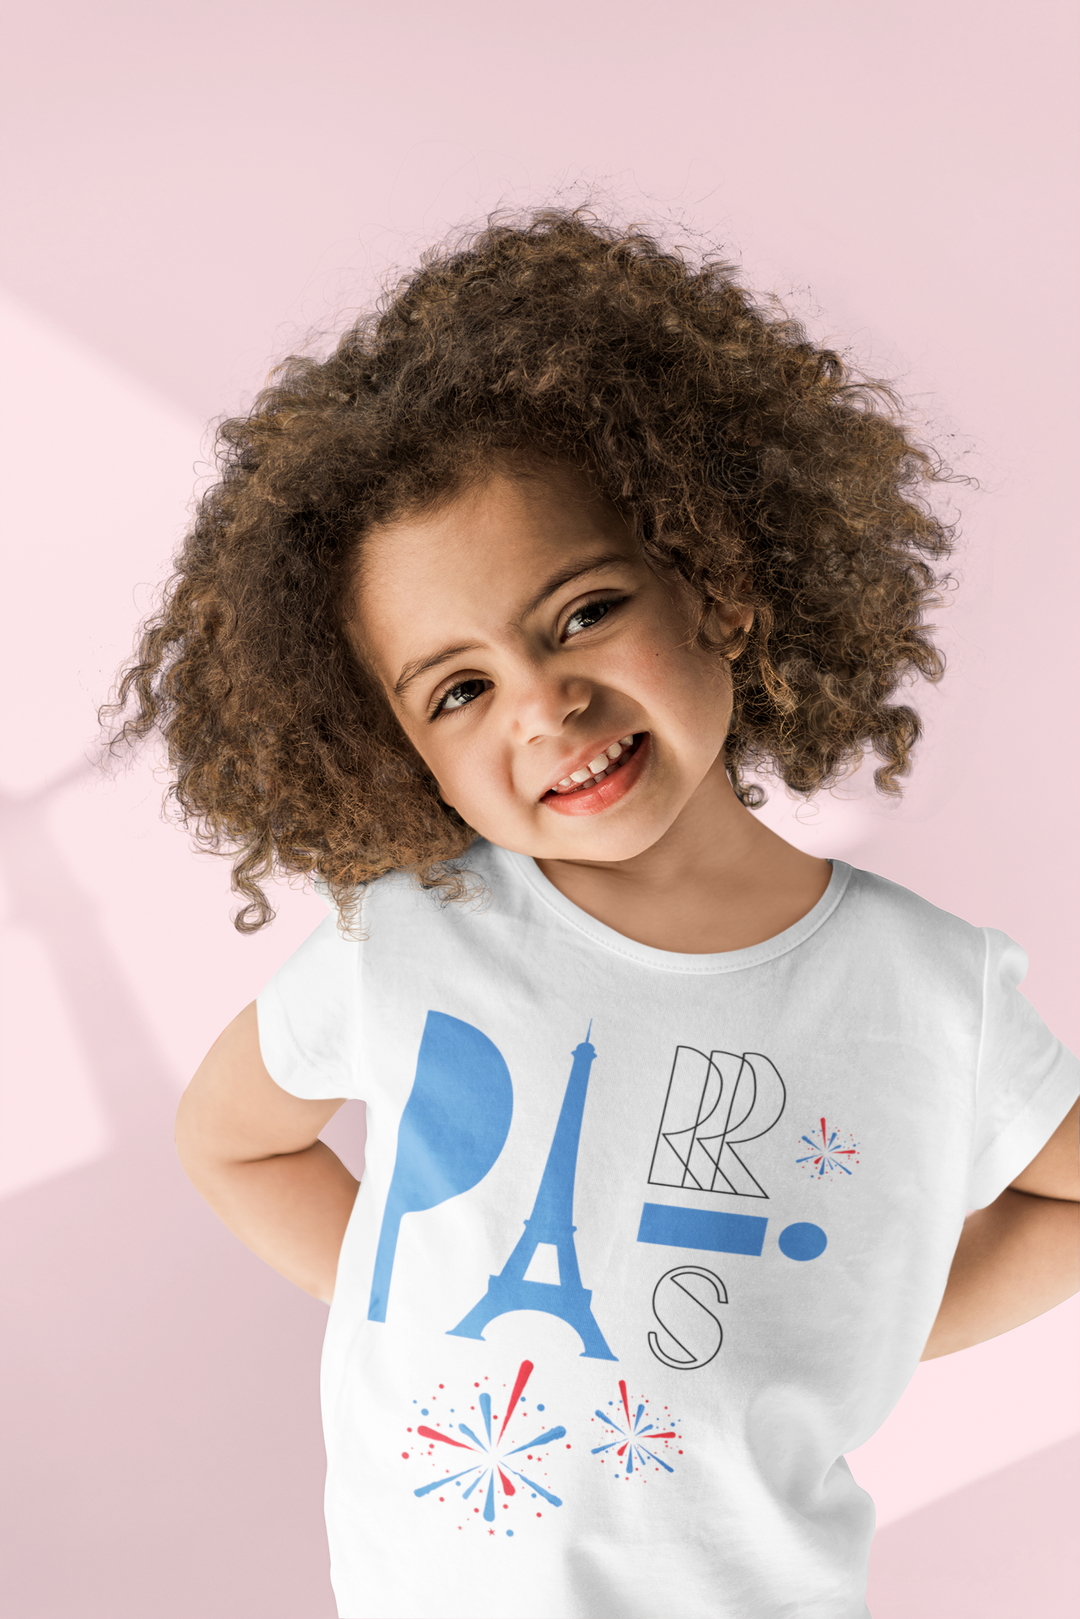 Paris letters. With a spark. Short sleeve t shirt for toddler and kids. - TeesForToddlersandKids -  t-shirt - seasons, summer - paris-letters-with-a-spark-short-sleeve-t-shirt-for-toddler-and-kids